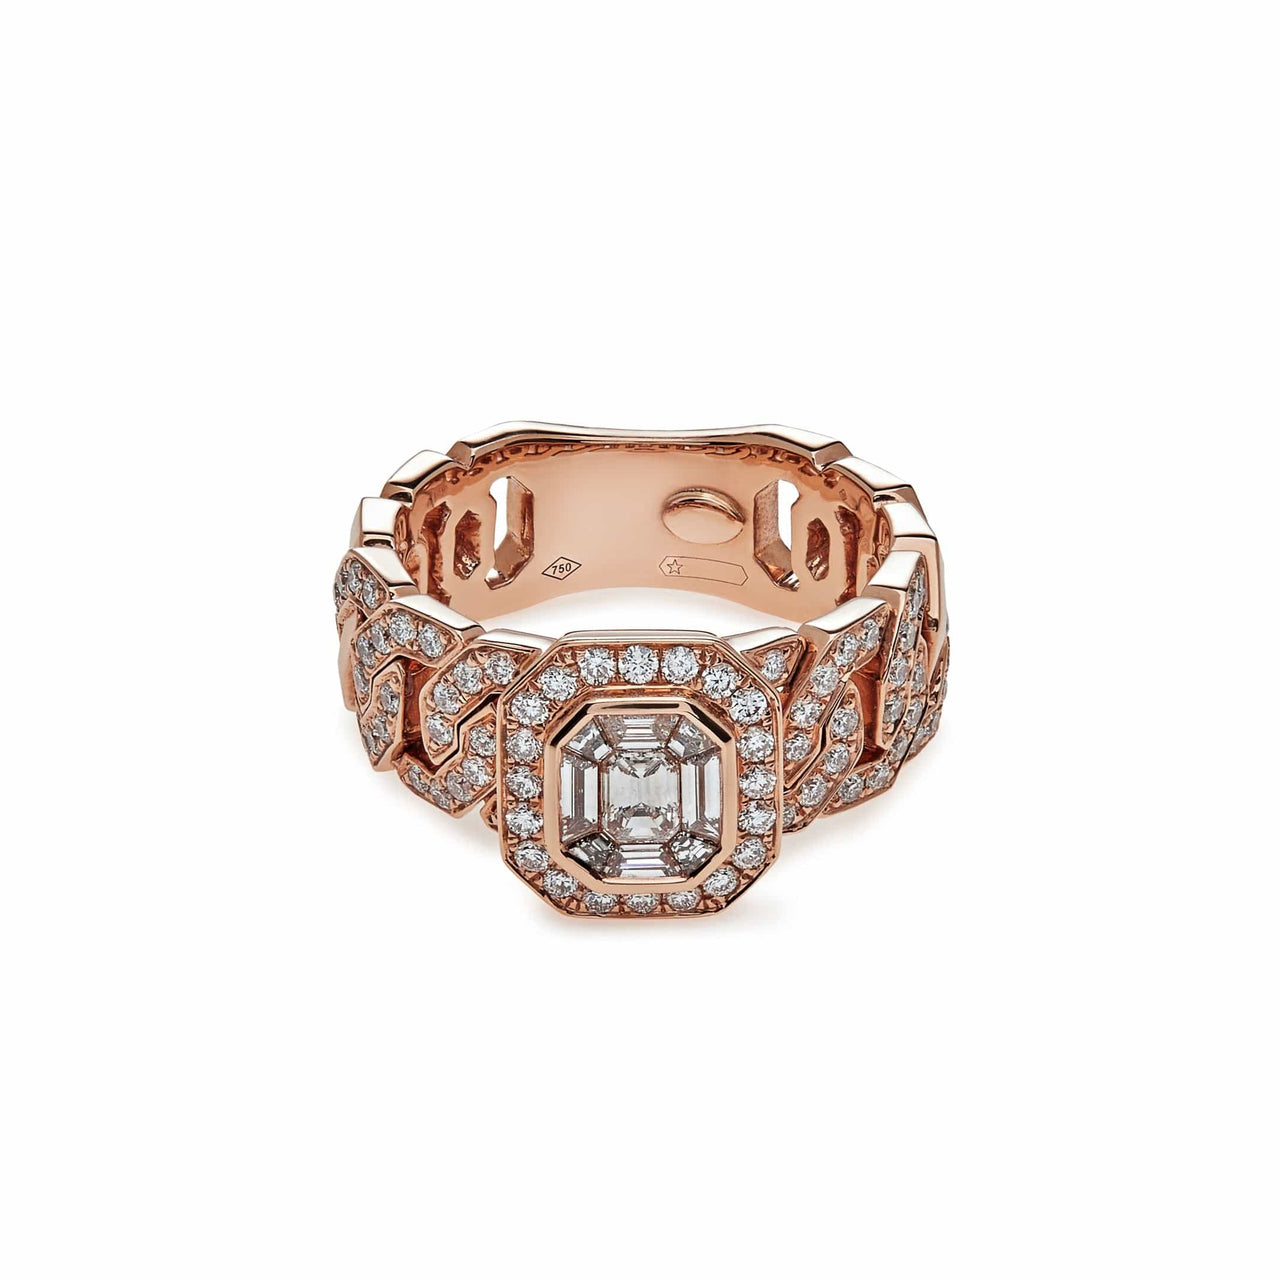 Rose Gold Diamond Cocktail Ring with Pave Chain Link Band Wrist Aficionado